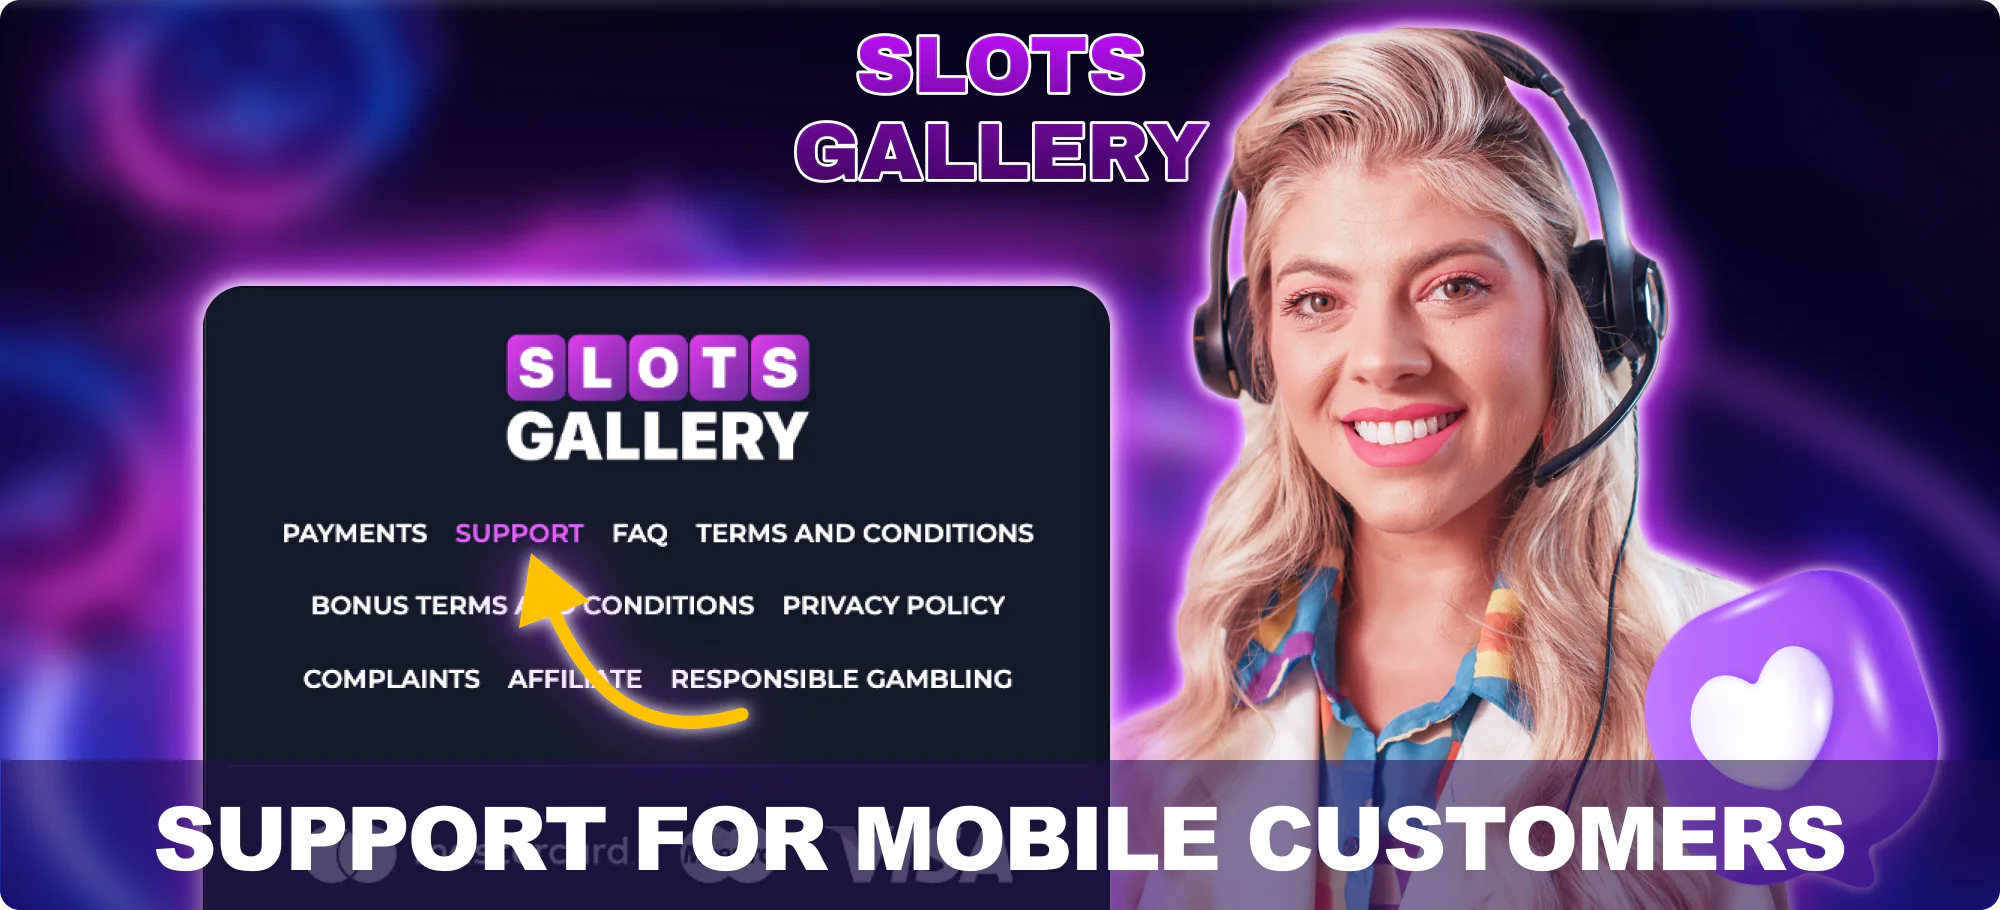 Customer support for mobile players from New Zealand - Slots Gallery